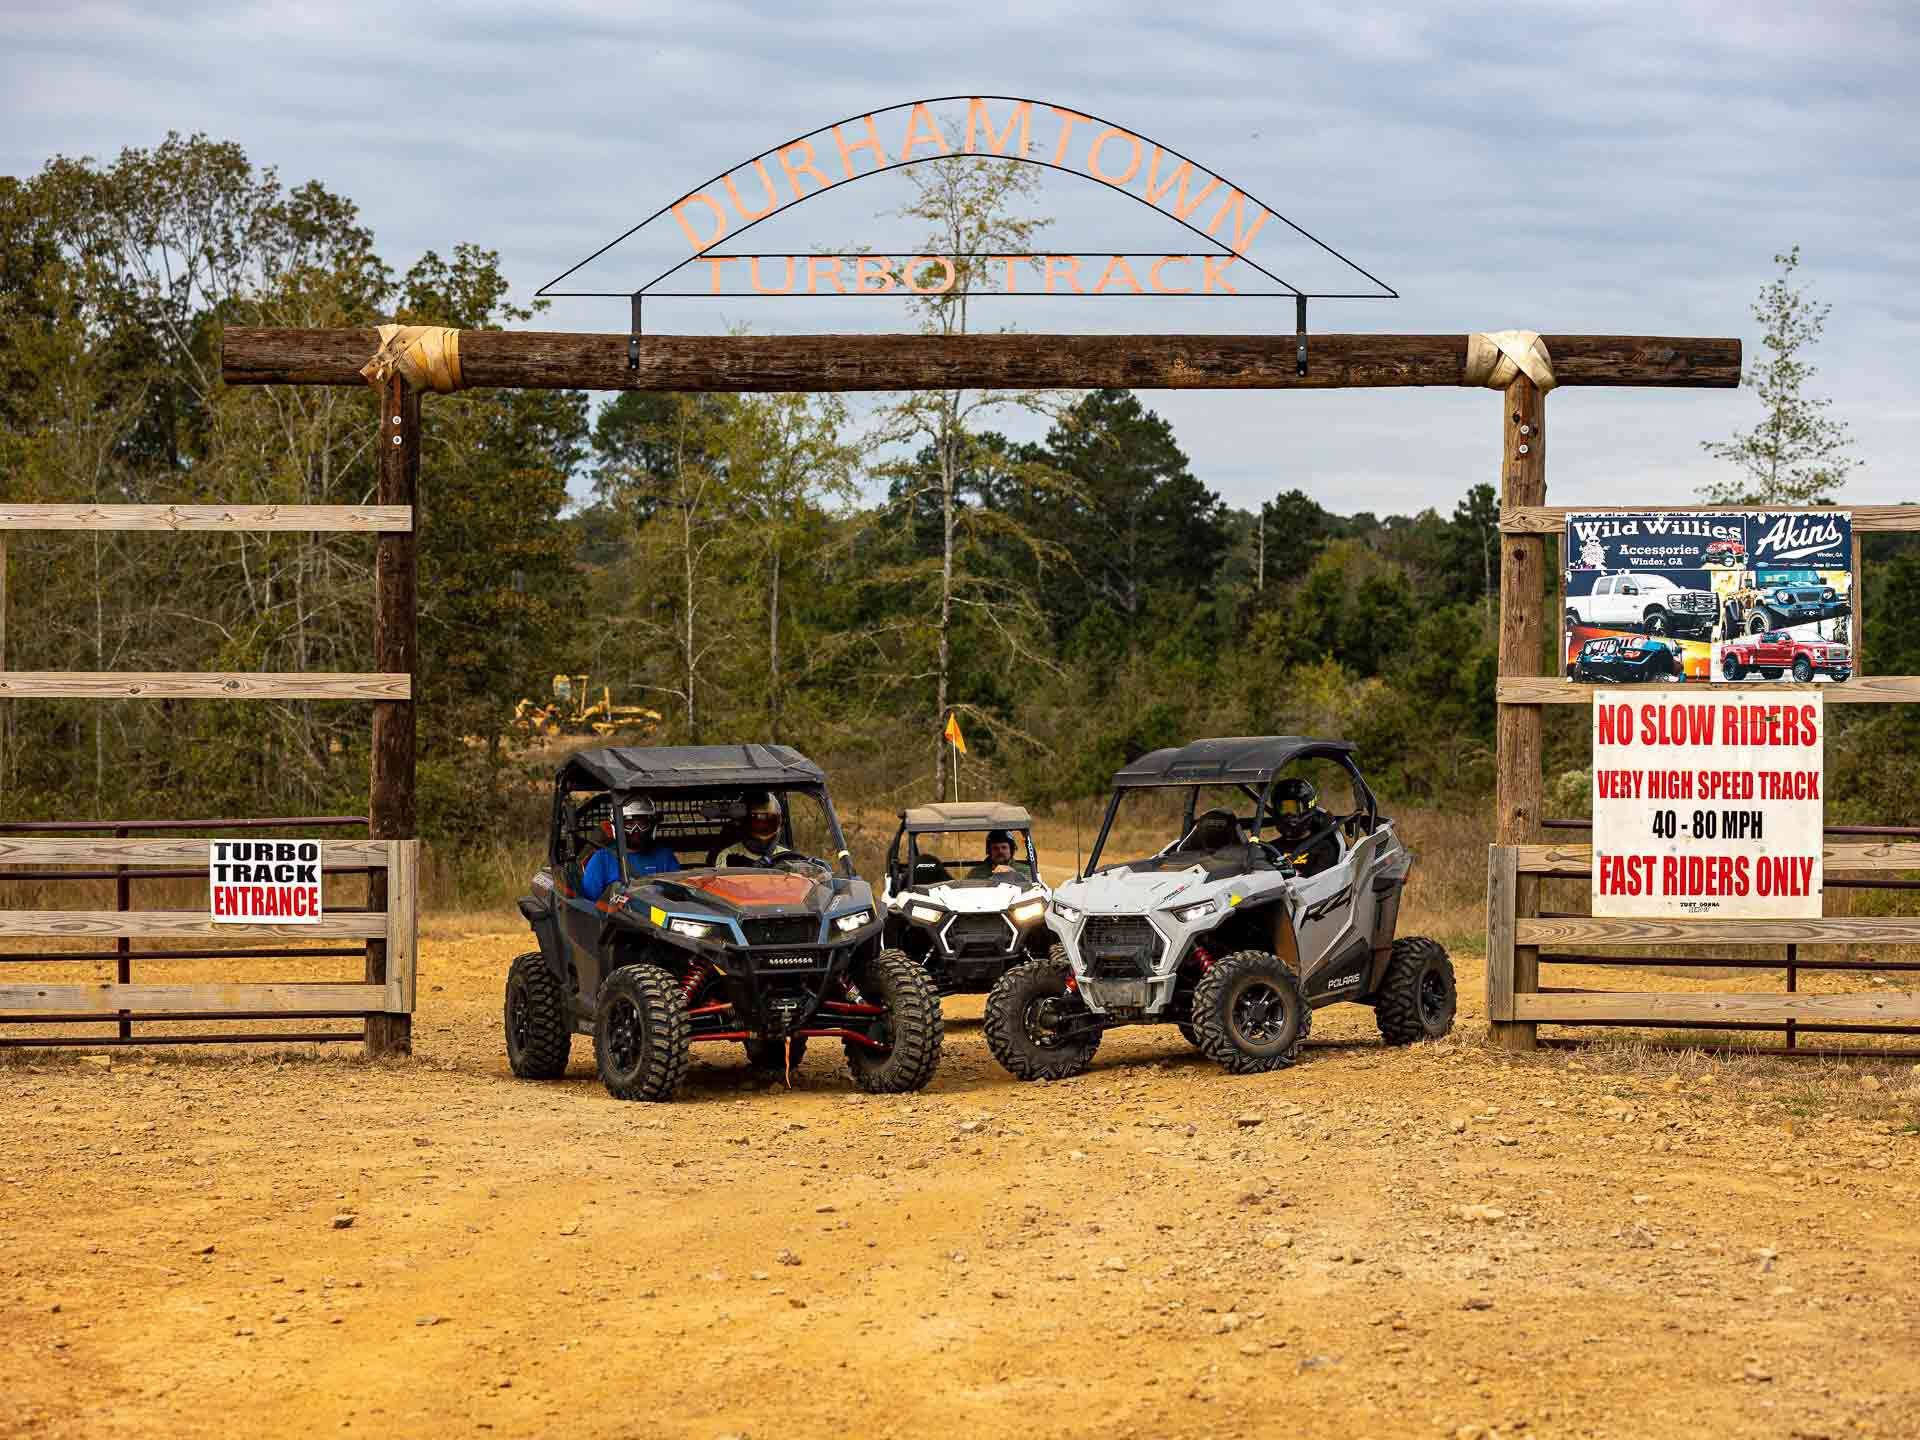 Durhamtown Off Road Park was a premier East Coast riding destination, until it suddenly shuttered last week, sending shock waves through the powersports world.